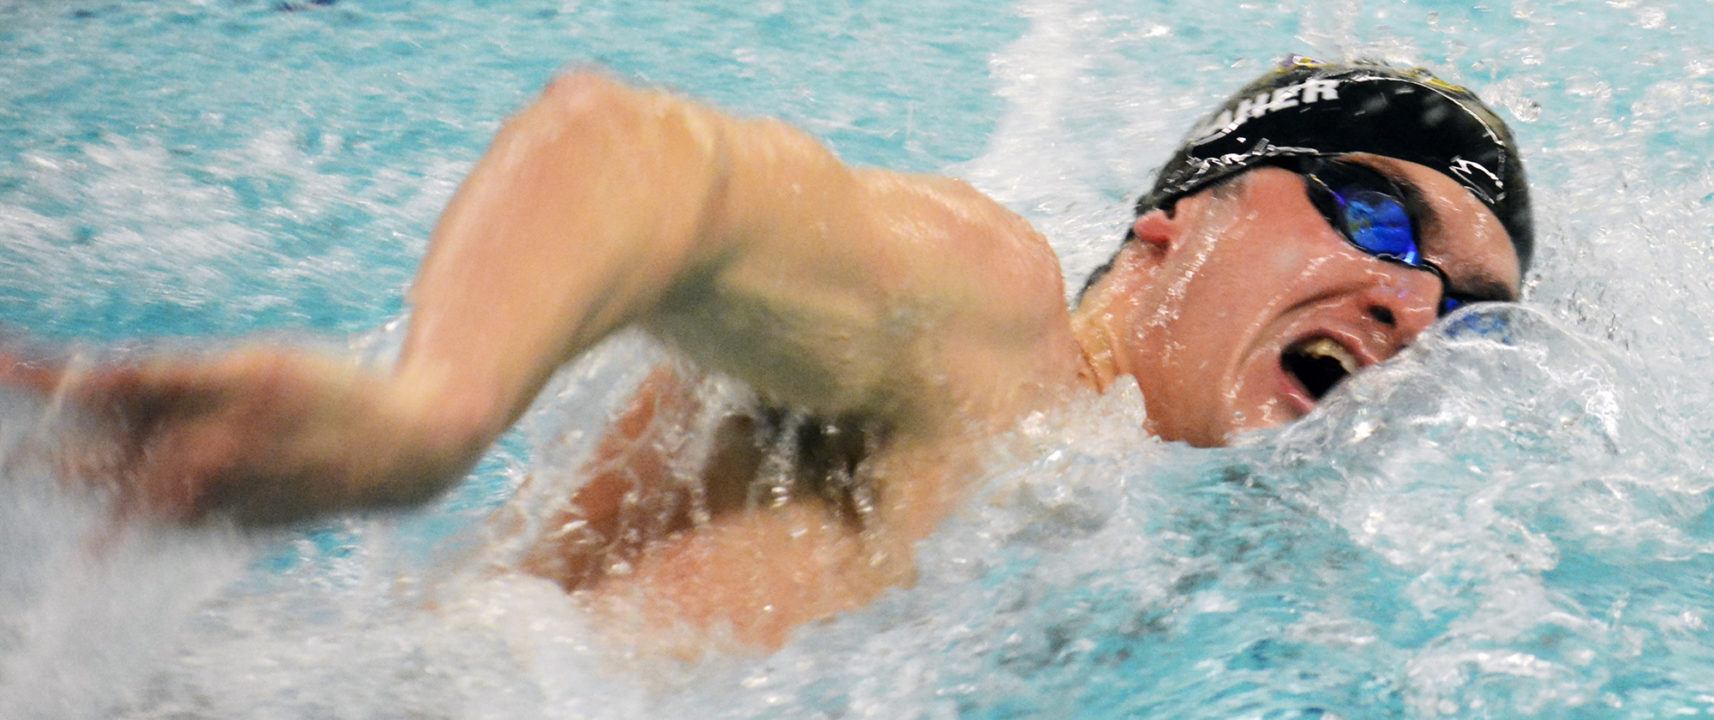 NESCAC Day 1: Williams Claims Early Lead with 800 Free Relay Victory